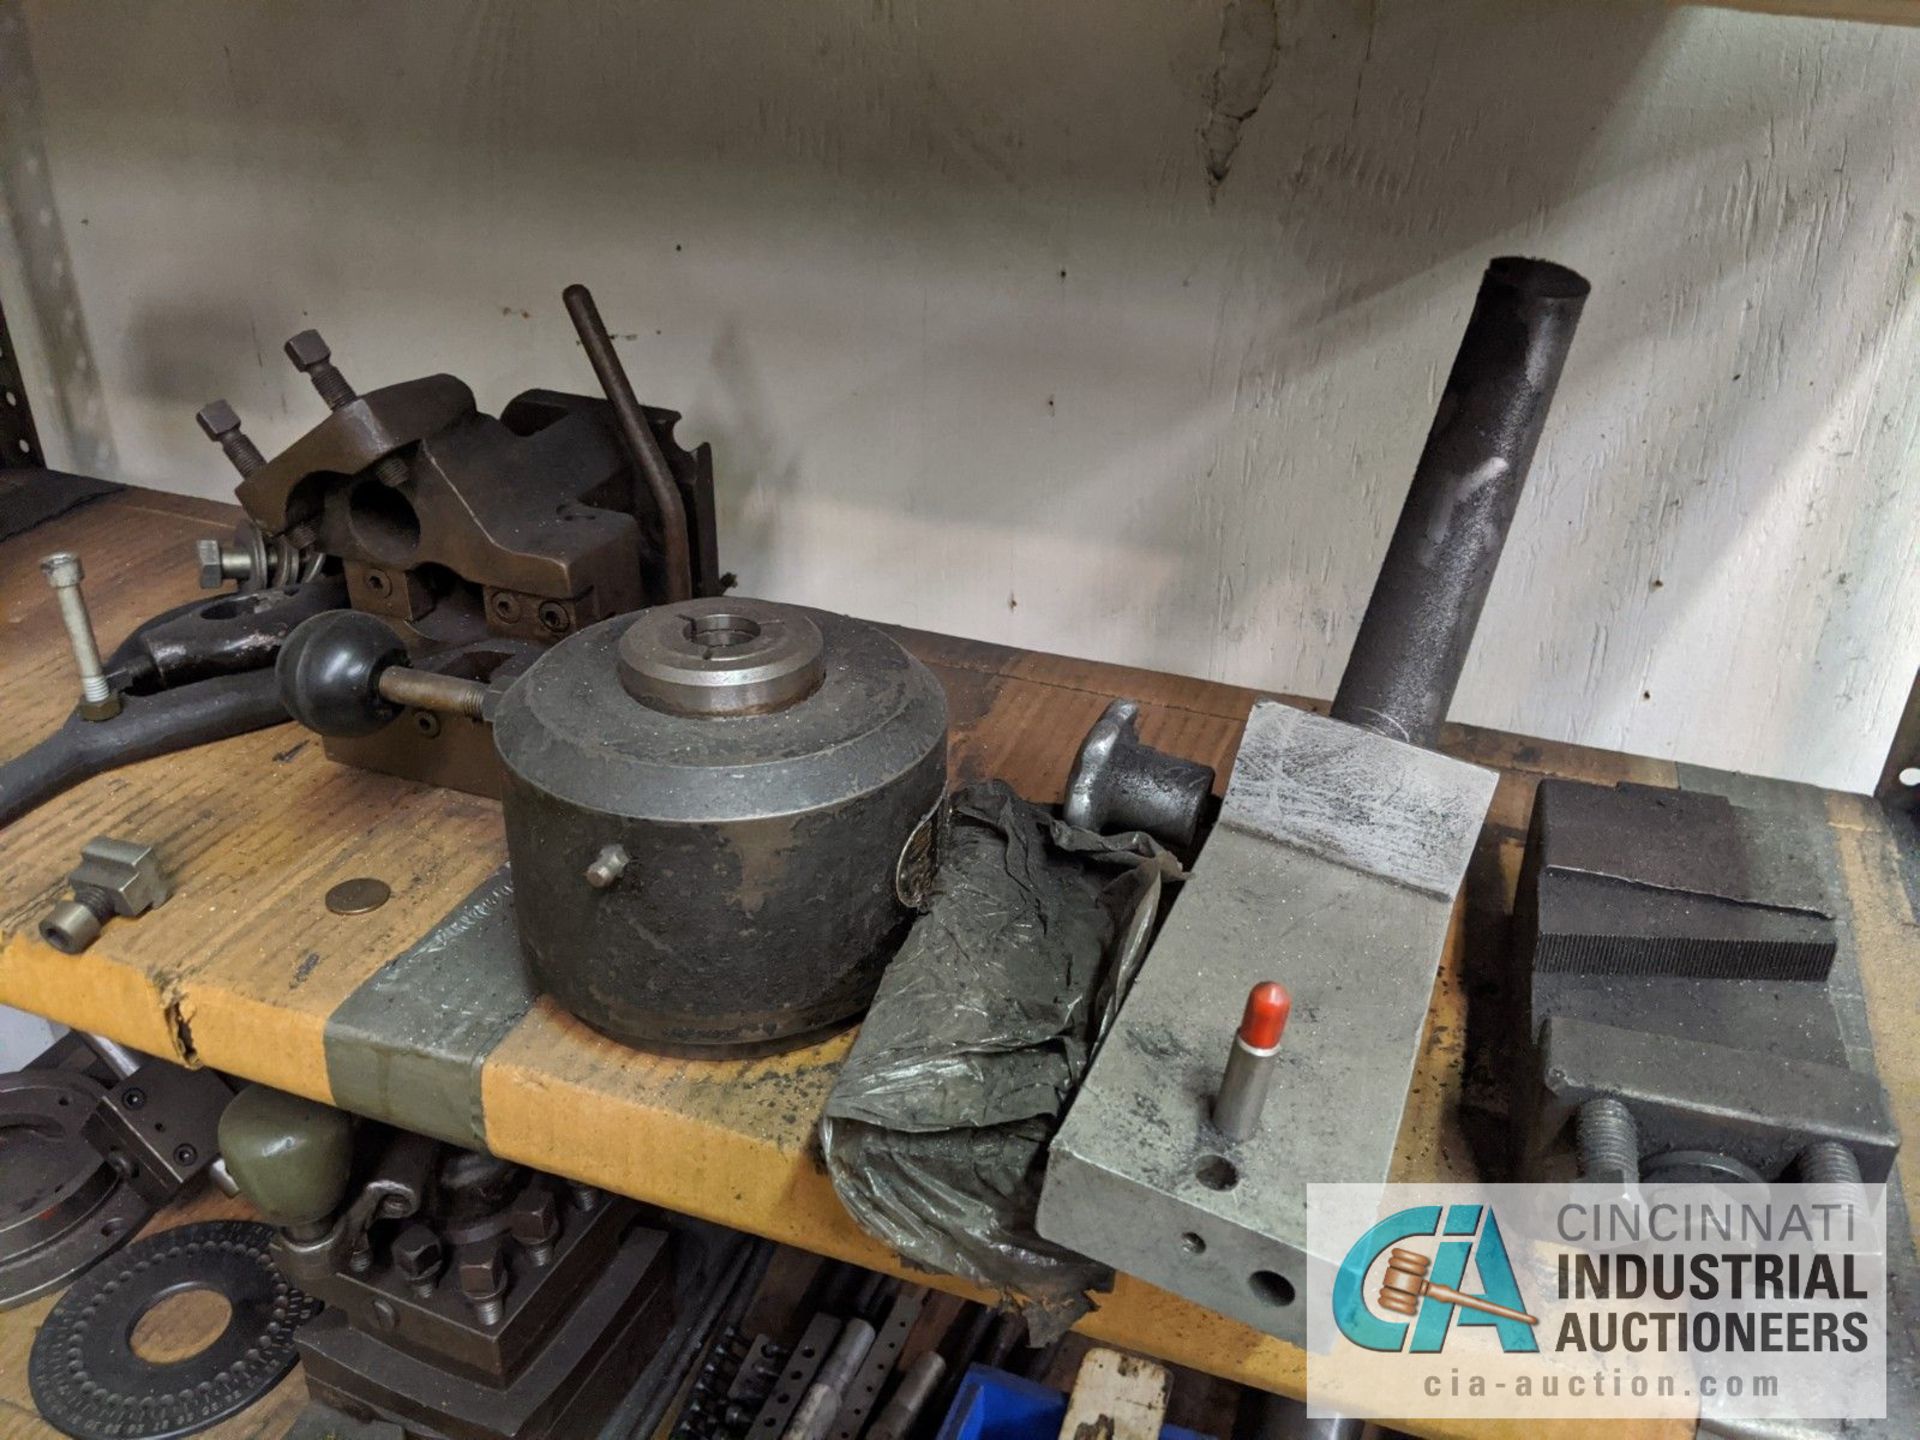 (LOT) SHELF UNIT WITH GRINDING FIXTURES AND ACCESSORIES AND GRINDING WHEELS ON WALL - Image 2 of 5